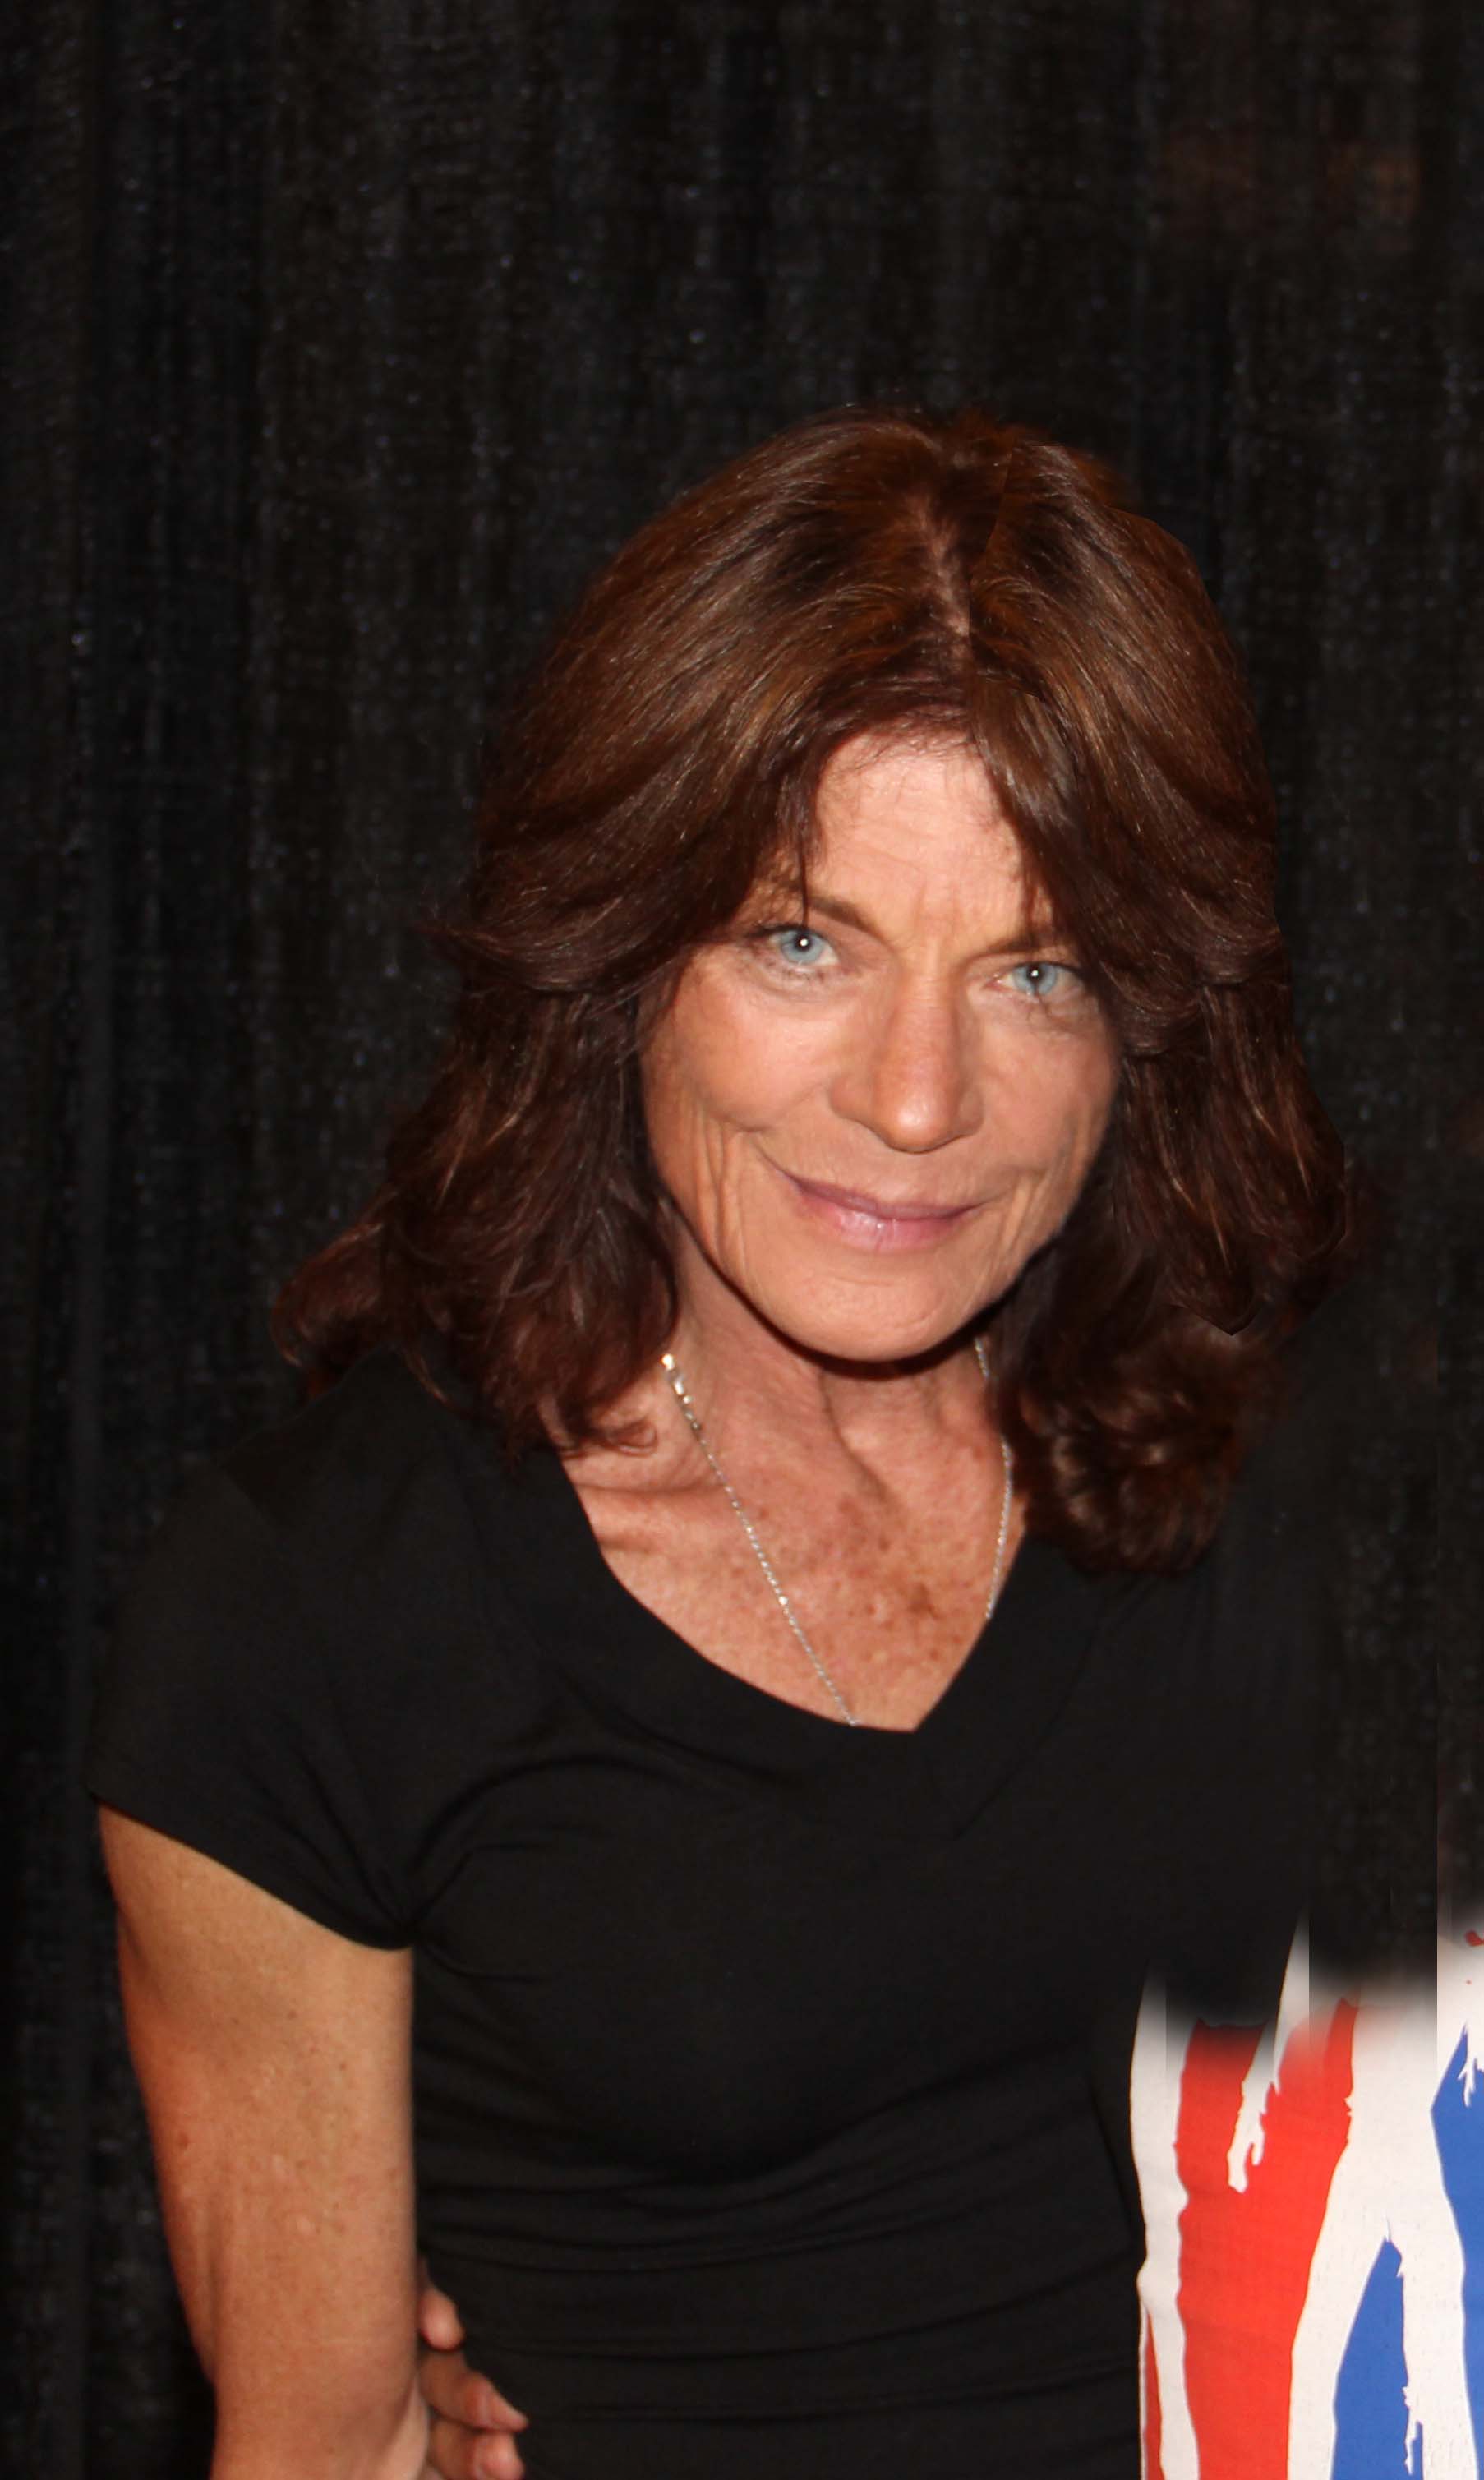 More Pictures Of Meg Foster. meg foster pictures. 